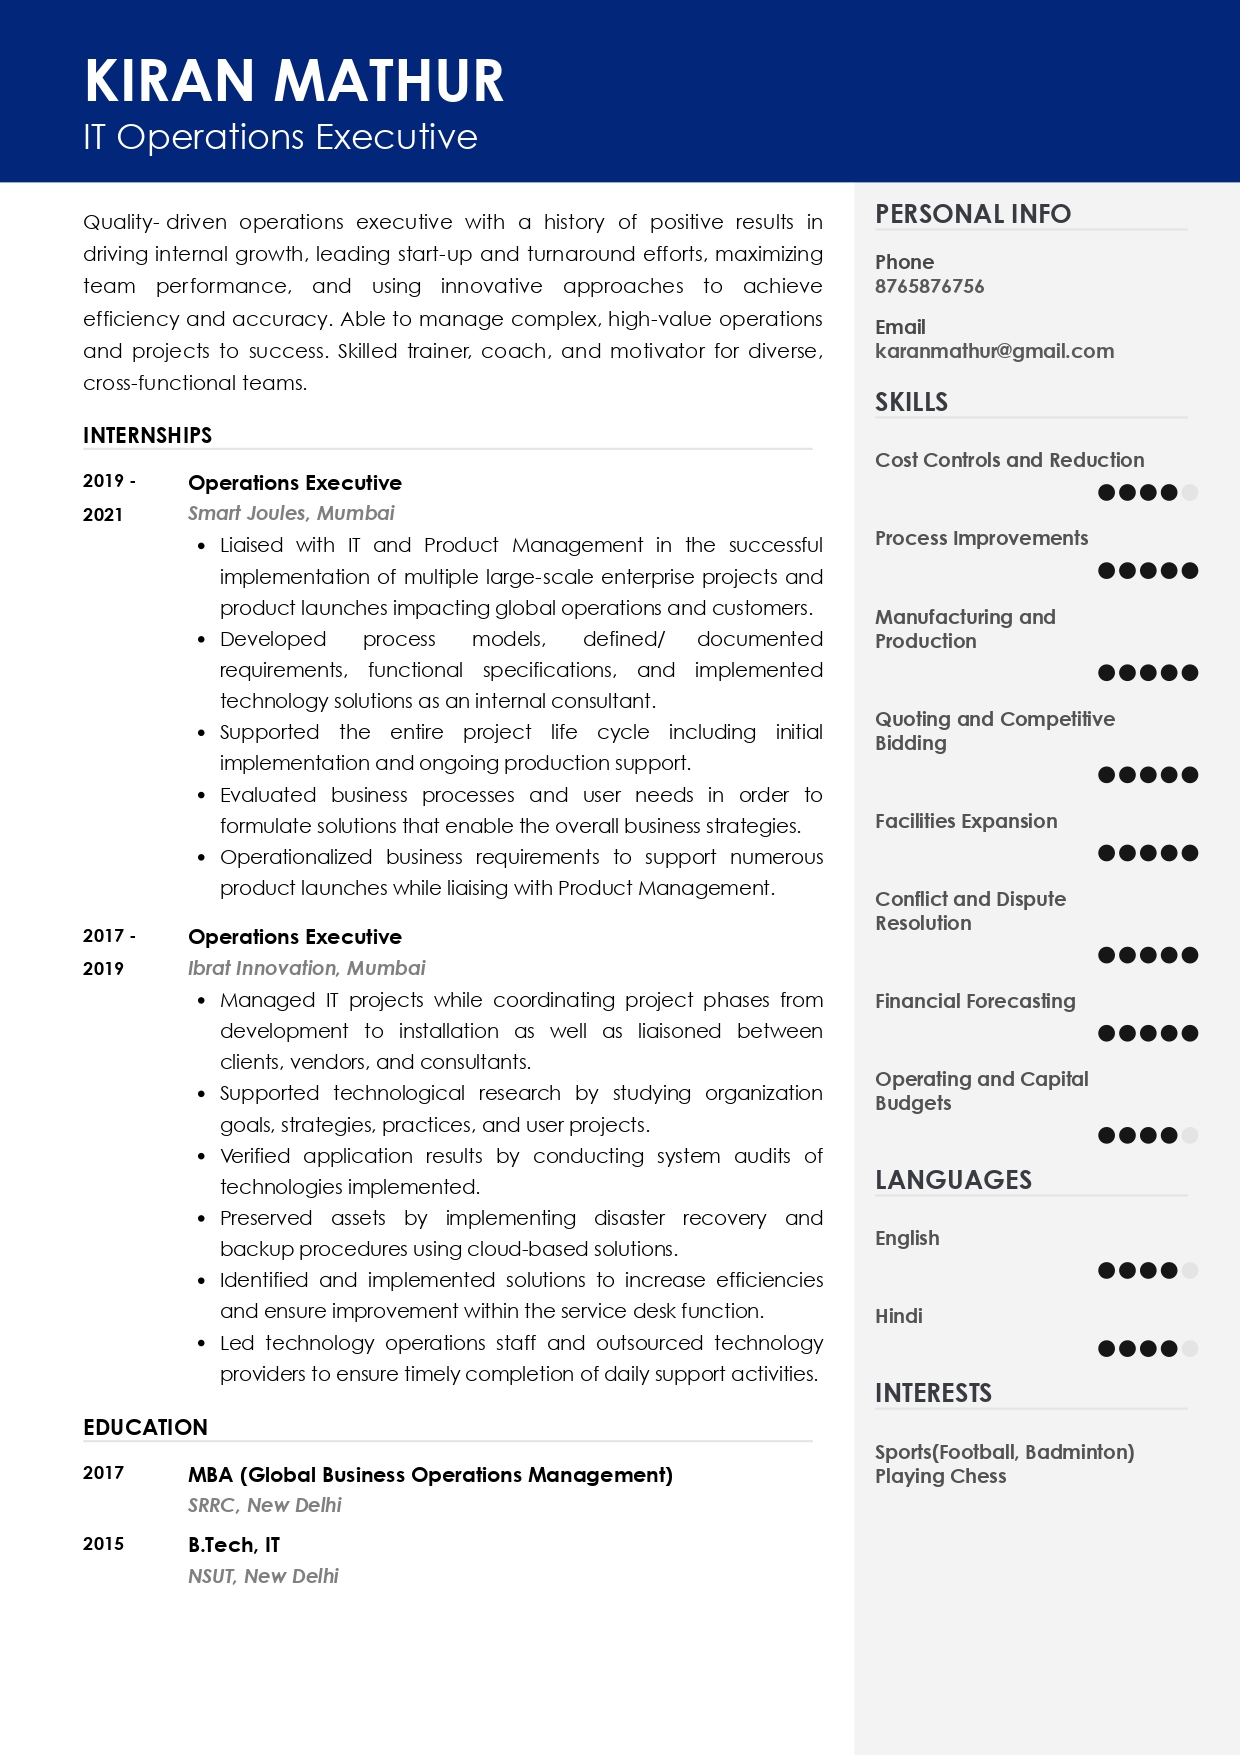 Resume of IT Operations Executive